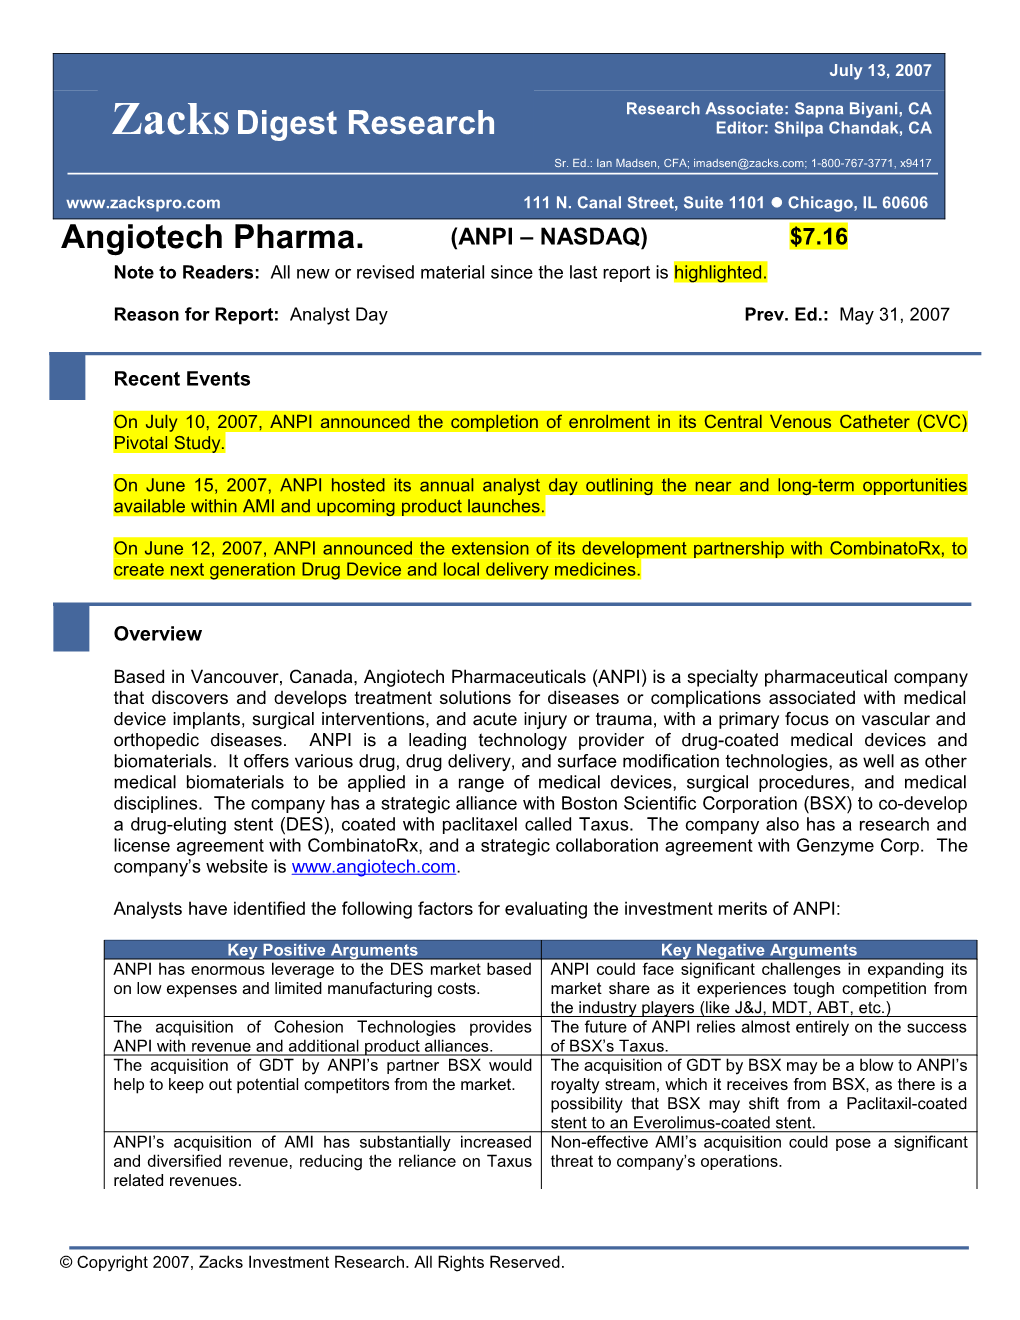 Reason for Report: Analyst Day Prev. Ed.: May 31, 2007